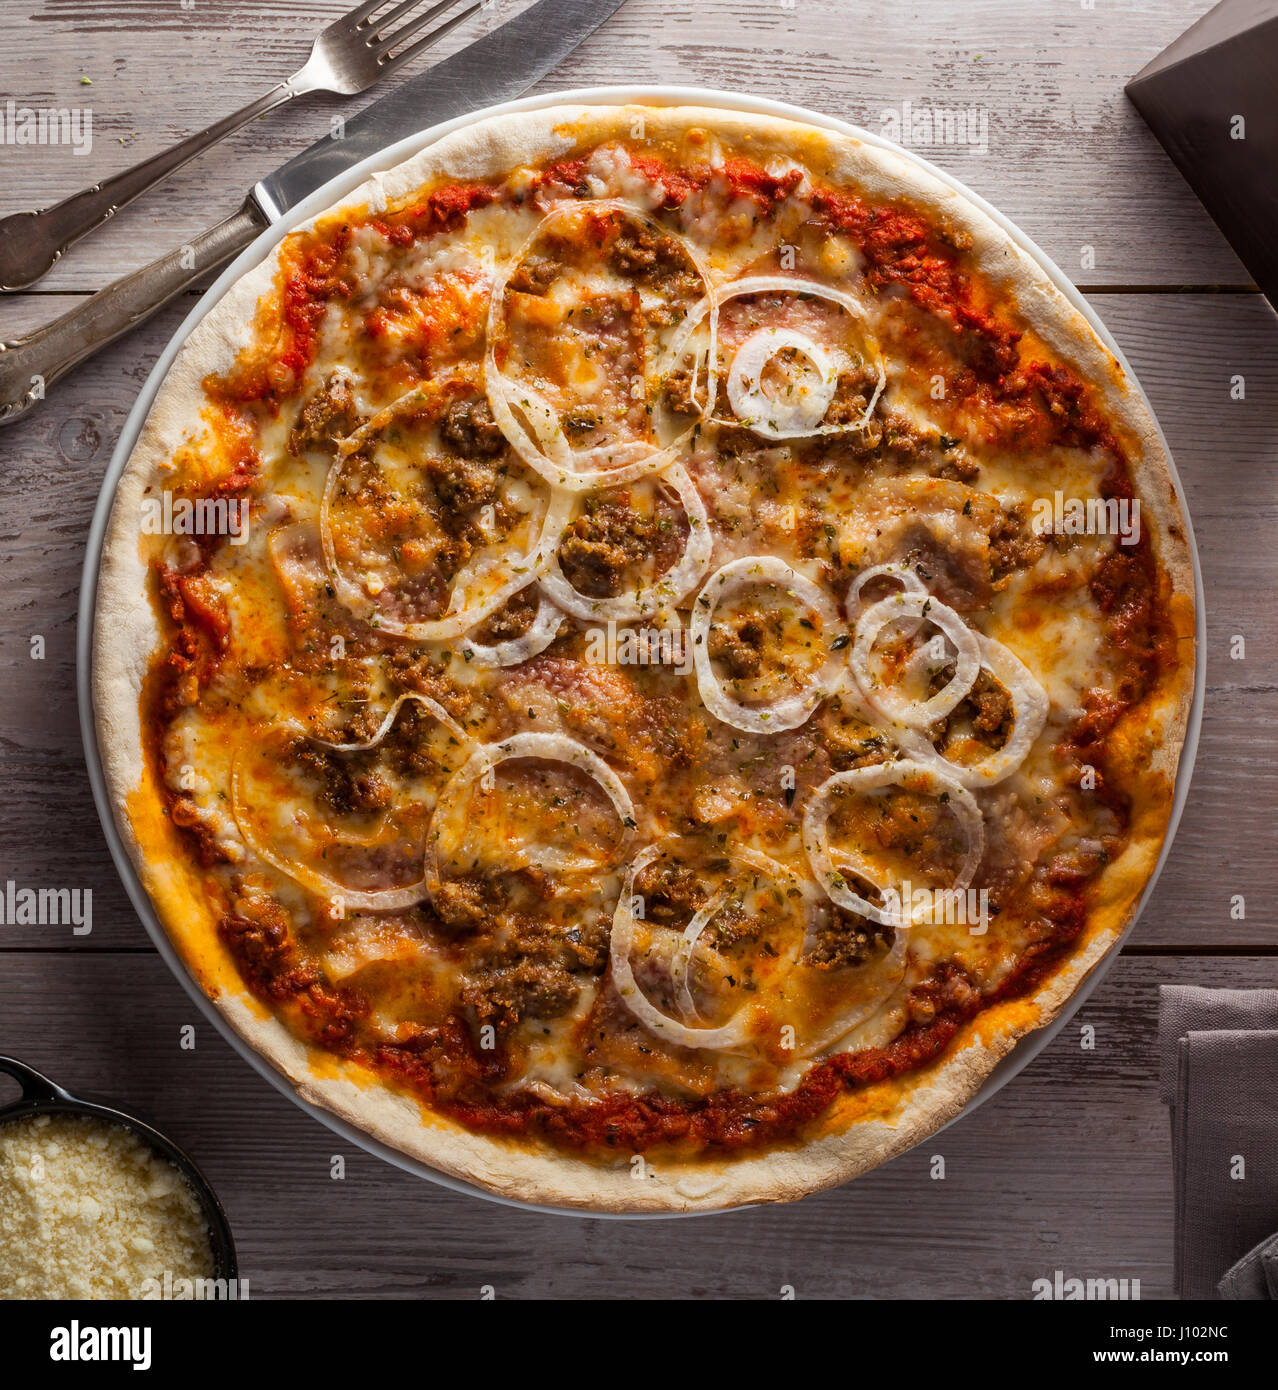 Barbecue Pizza With Tomato Cheese Ground Meat Onions And Barbecue Stock Photo Alamy,White Chicken Chili Crockpot